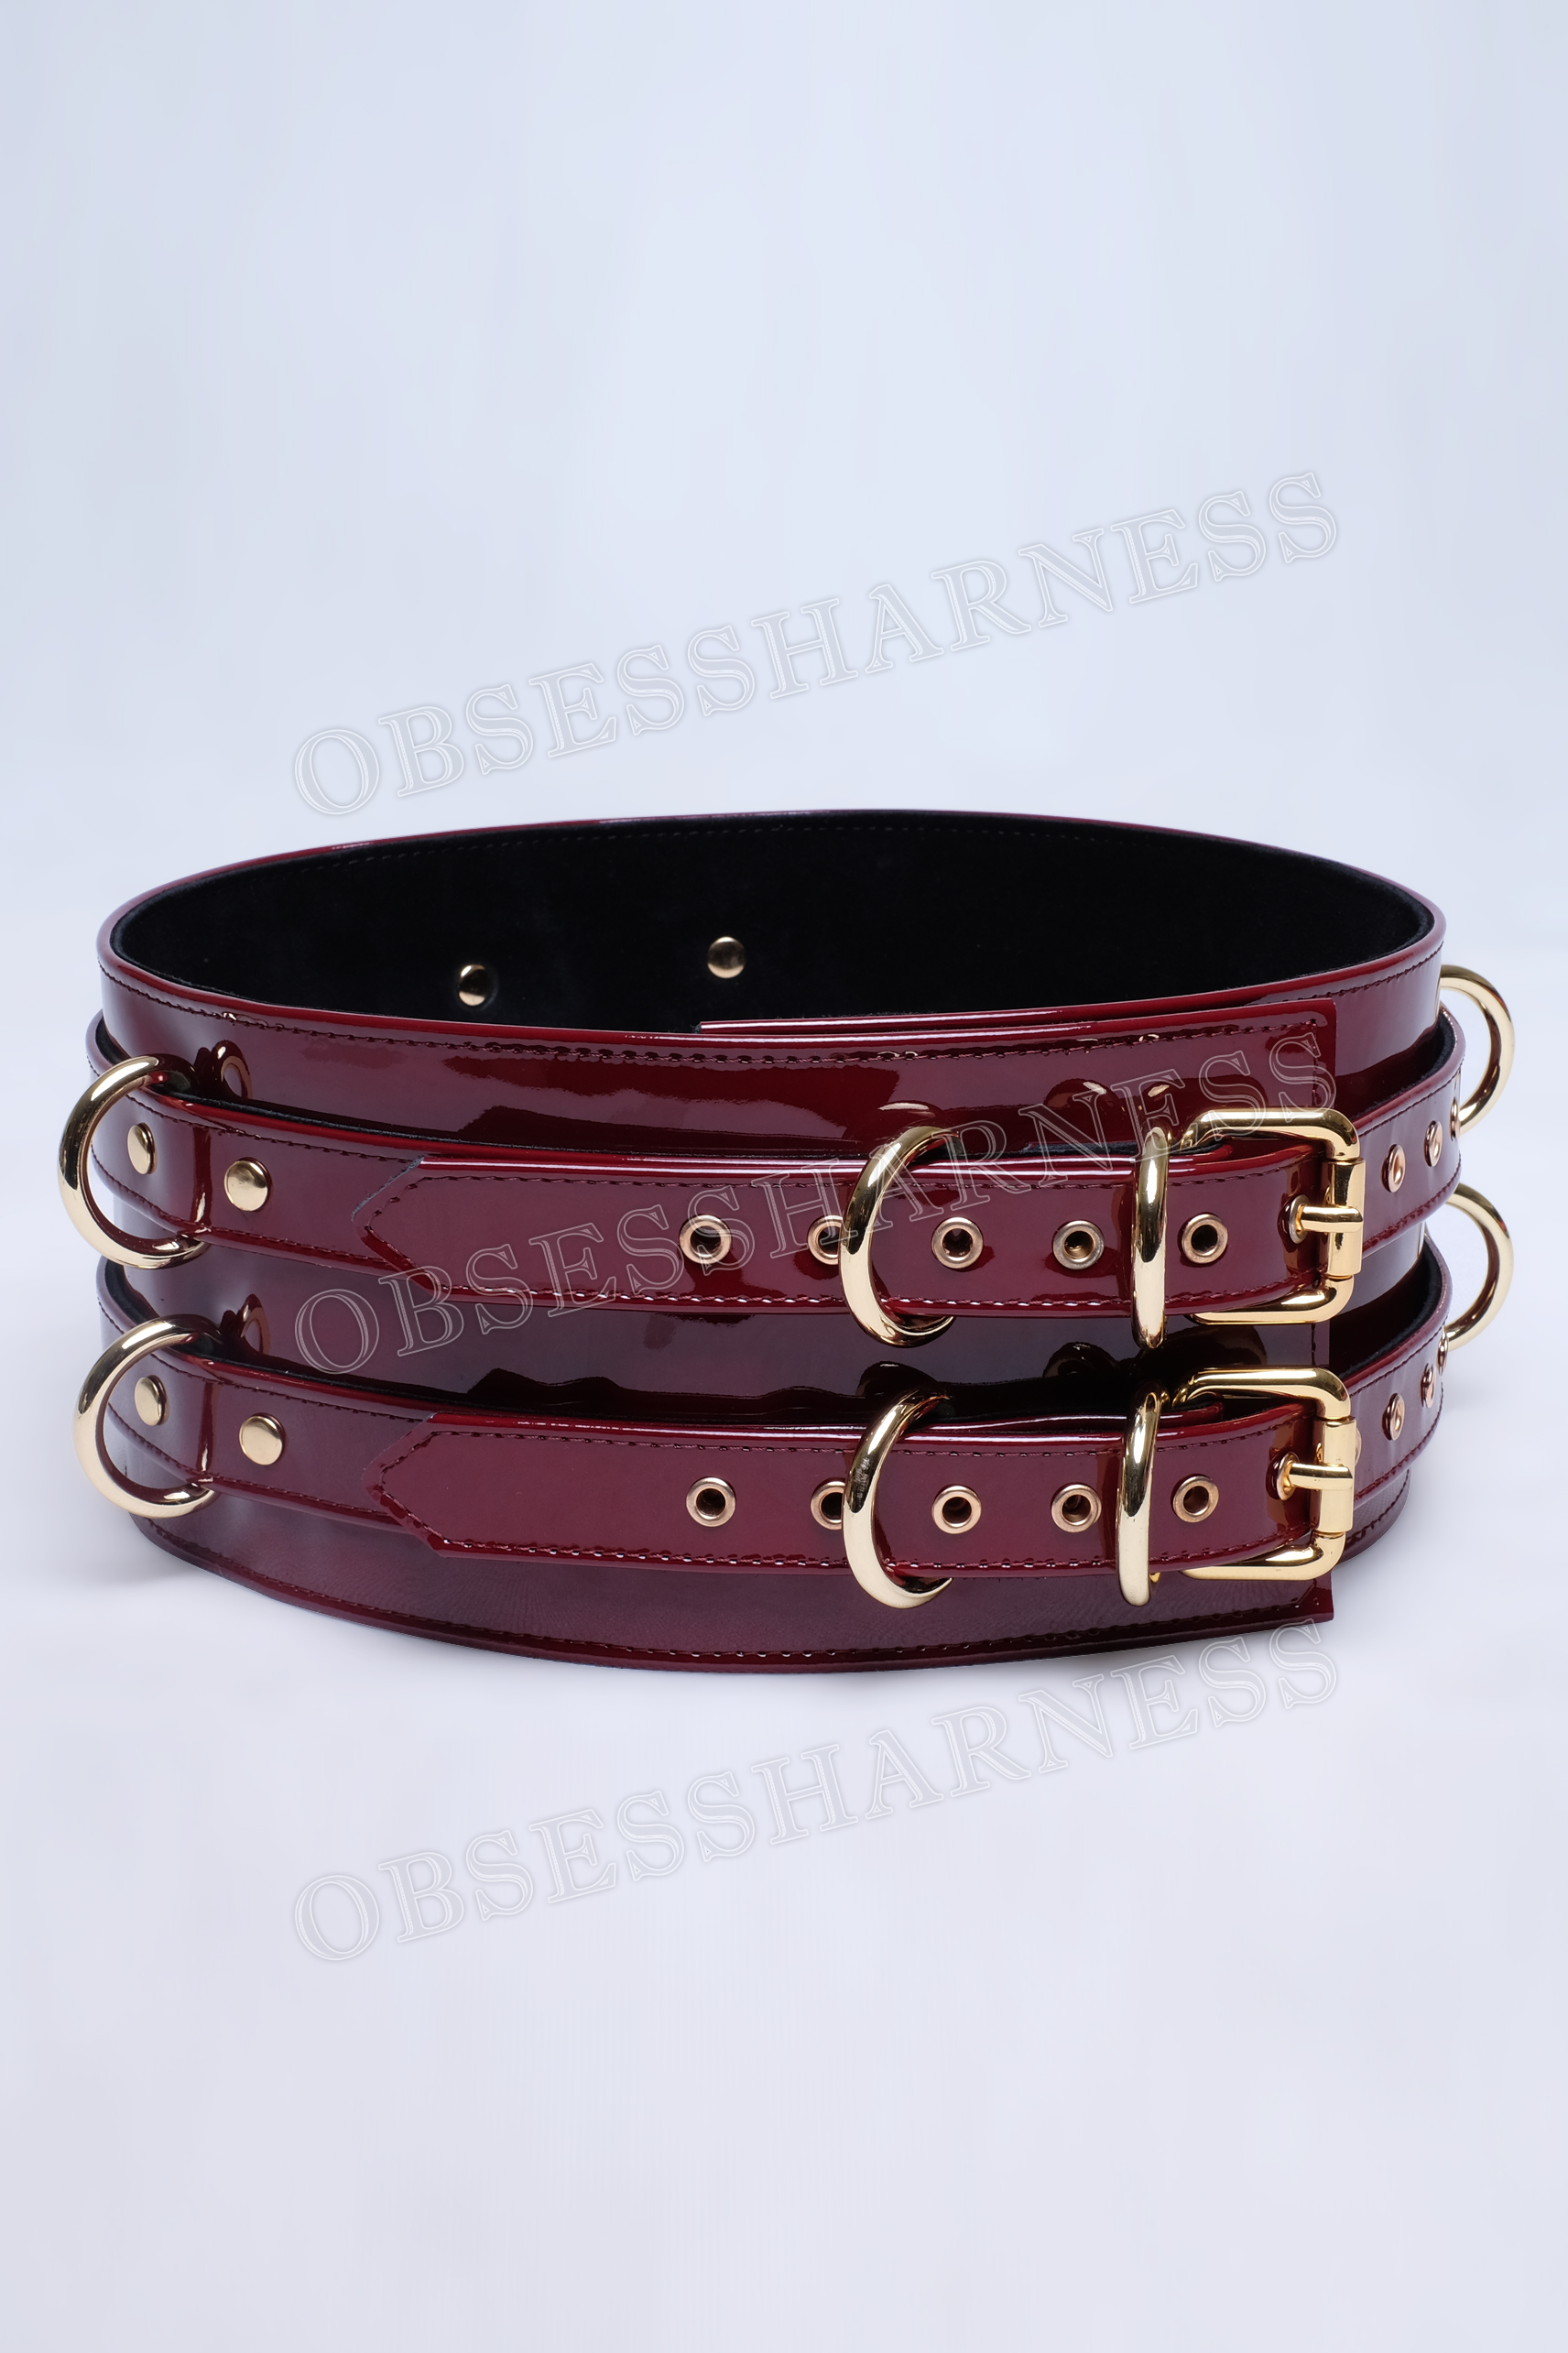 Belt bondage harness premium made of genuine patent leather with double fasteners at the waist and additional D-rings on the sides and back for attaching BDSM restraints to the submissive for role-playing games